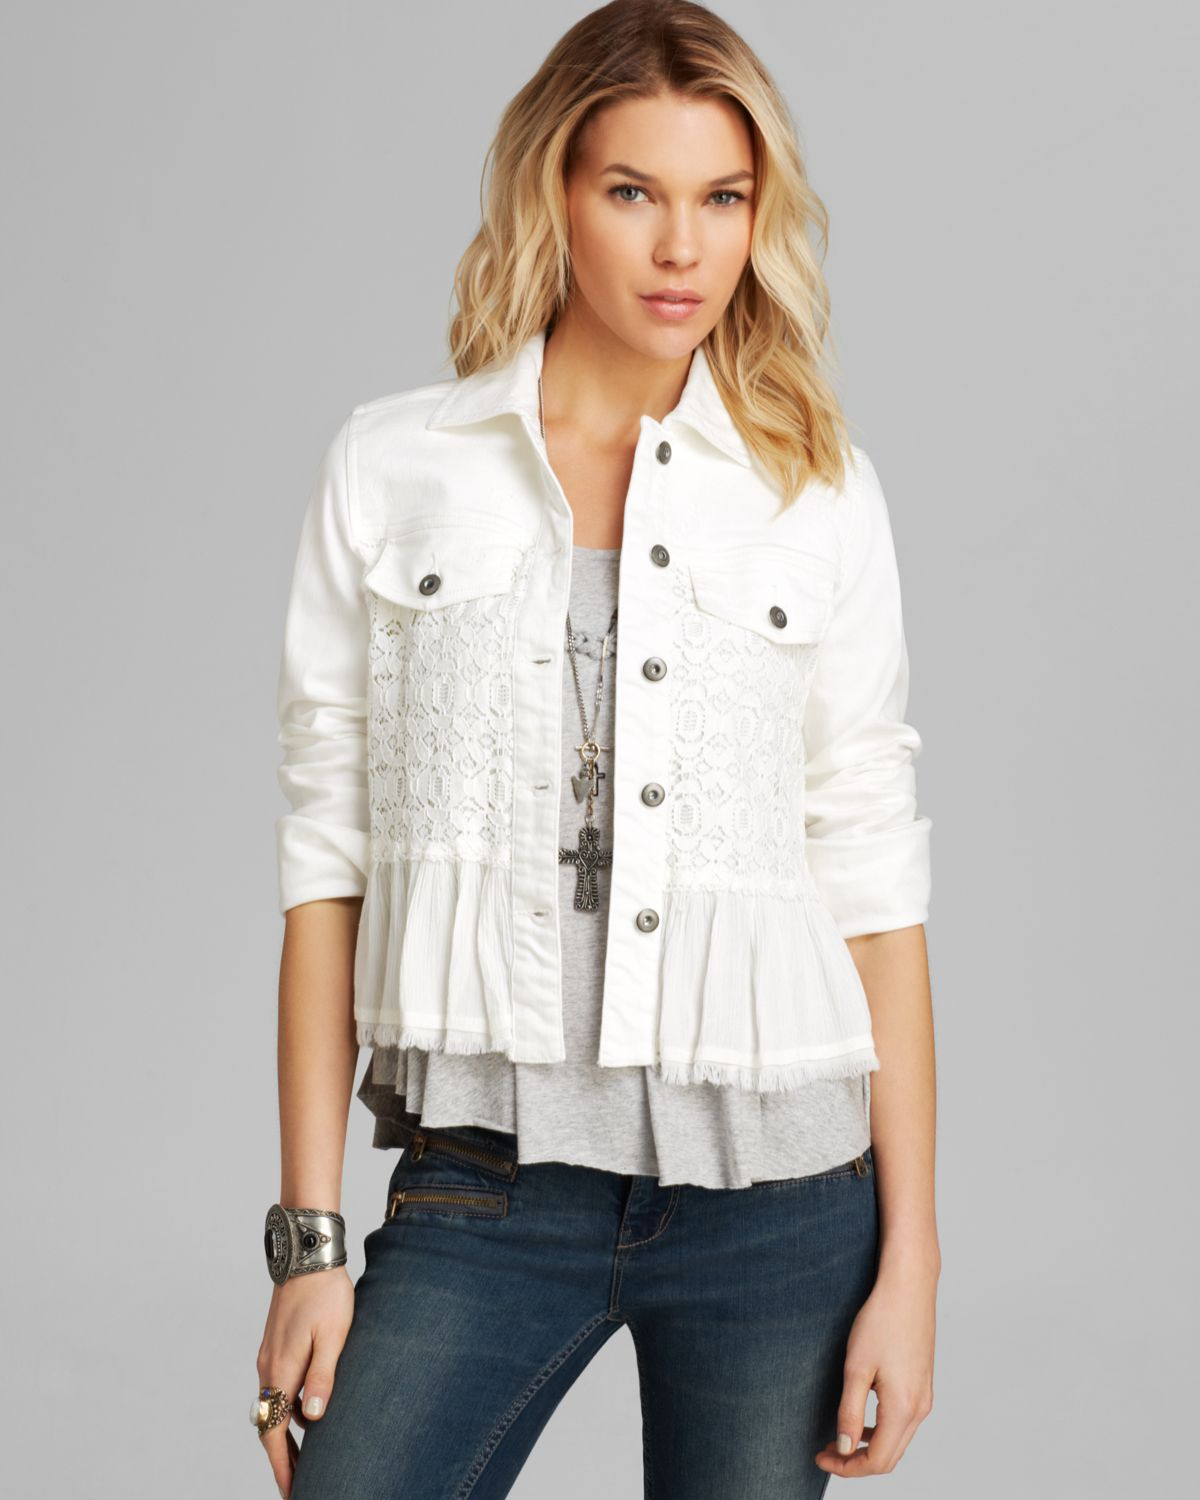 Free People Denim And Lace Mix Jacket in White | Lyst